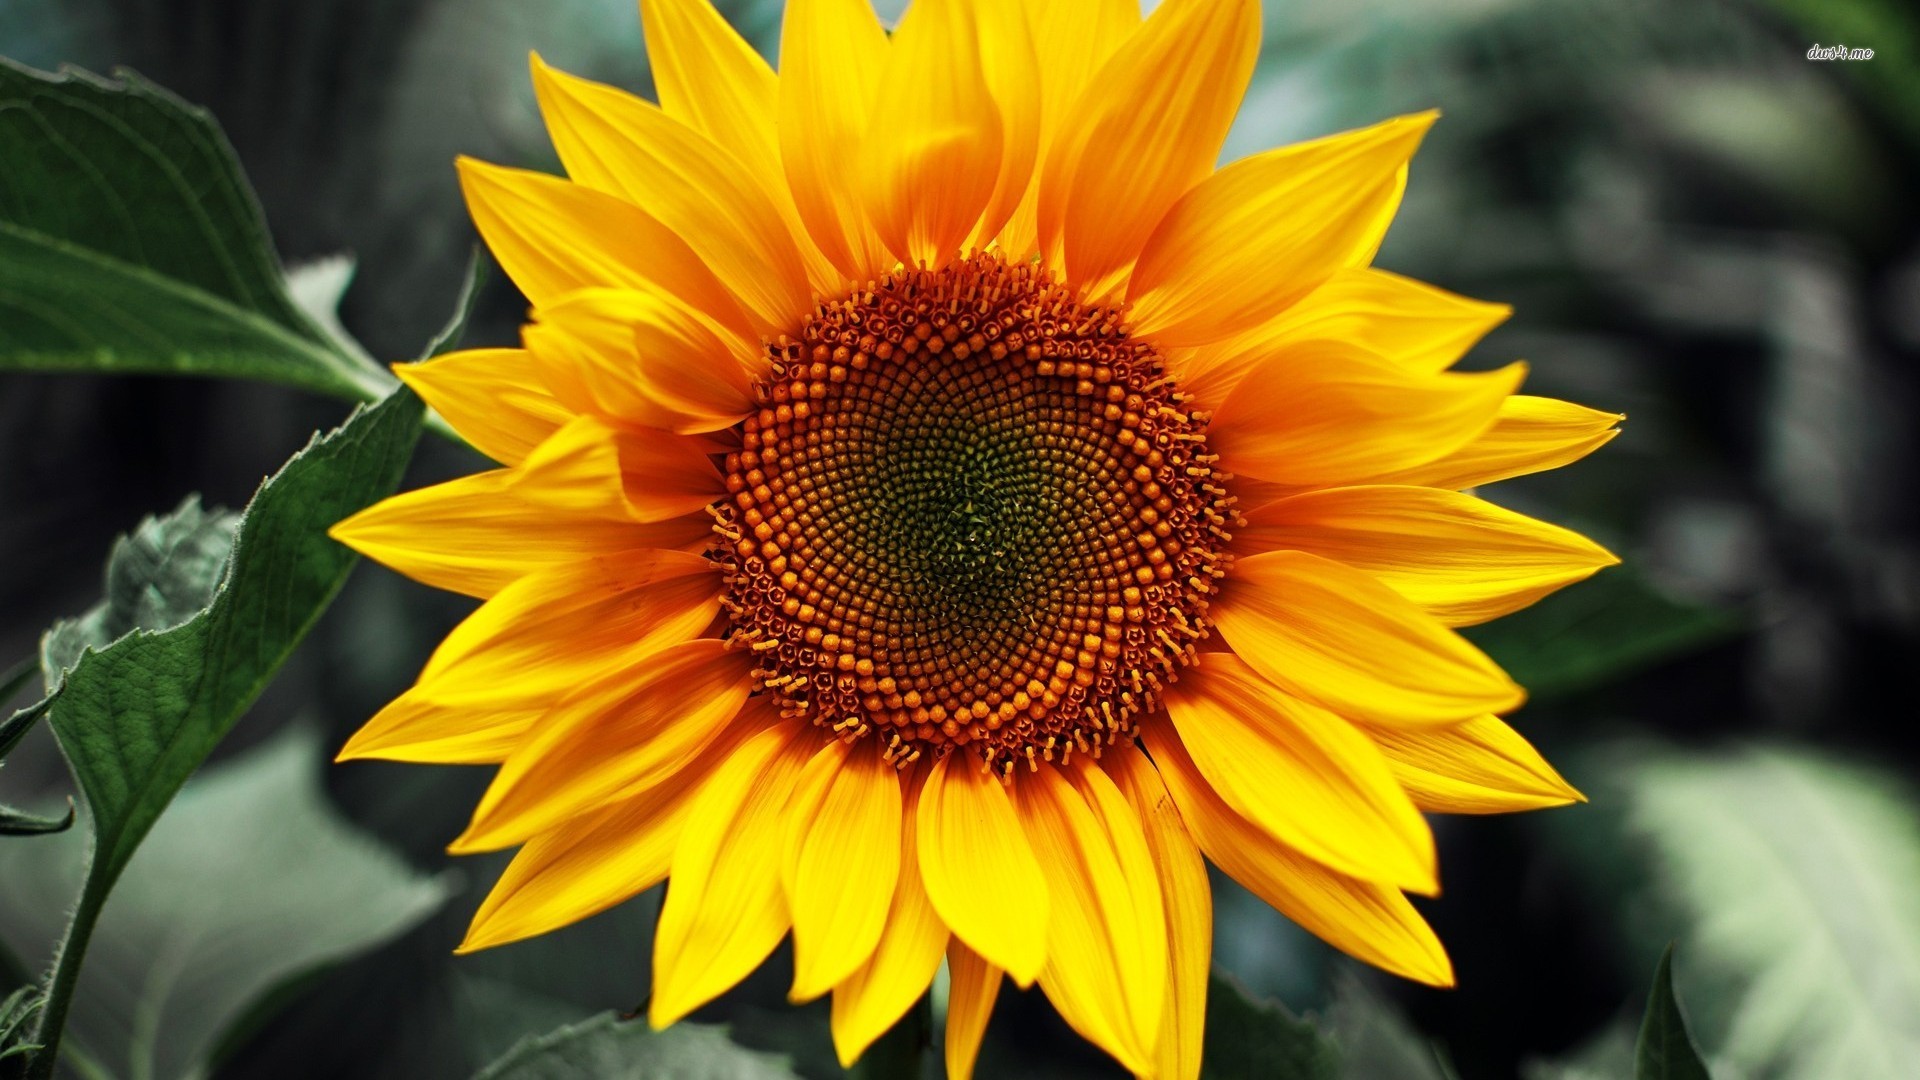 1920x1080 Adorable Sunflower Images Full HD,  px for desktop and mobile